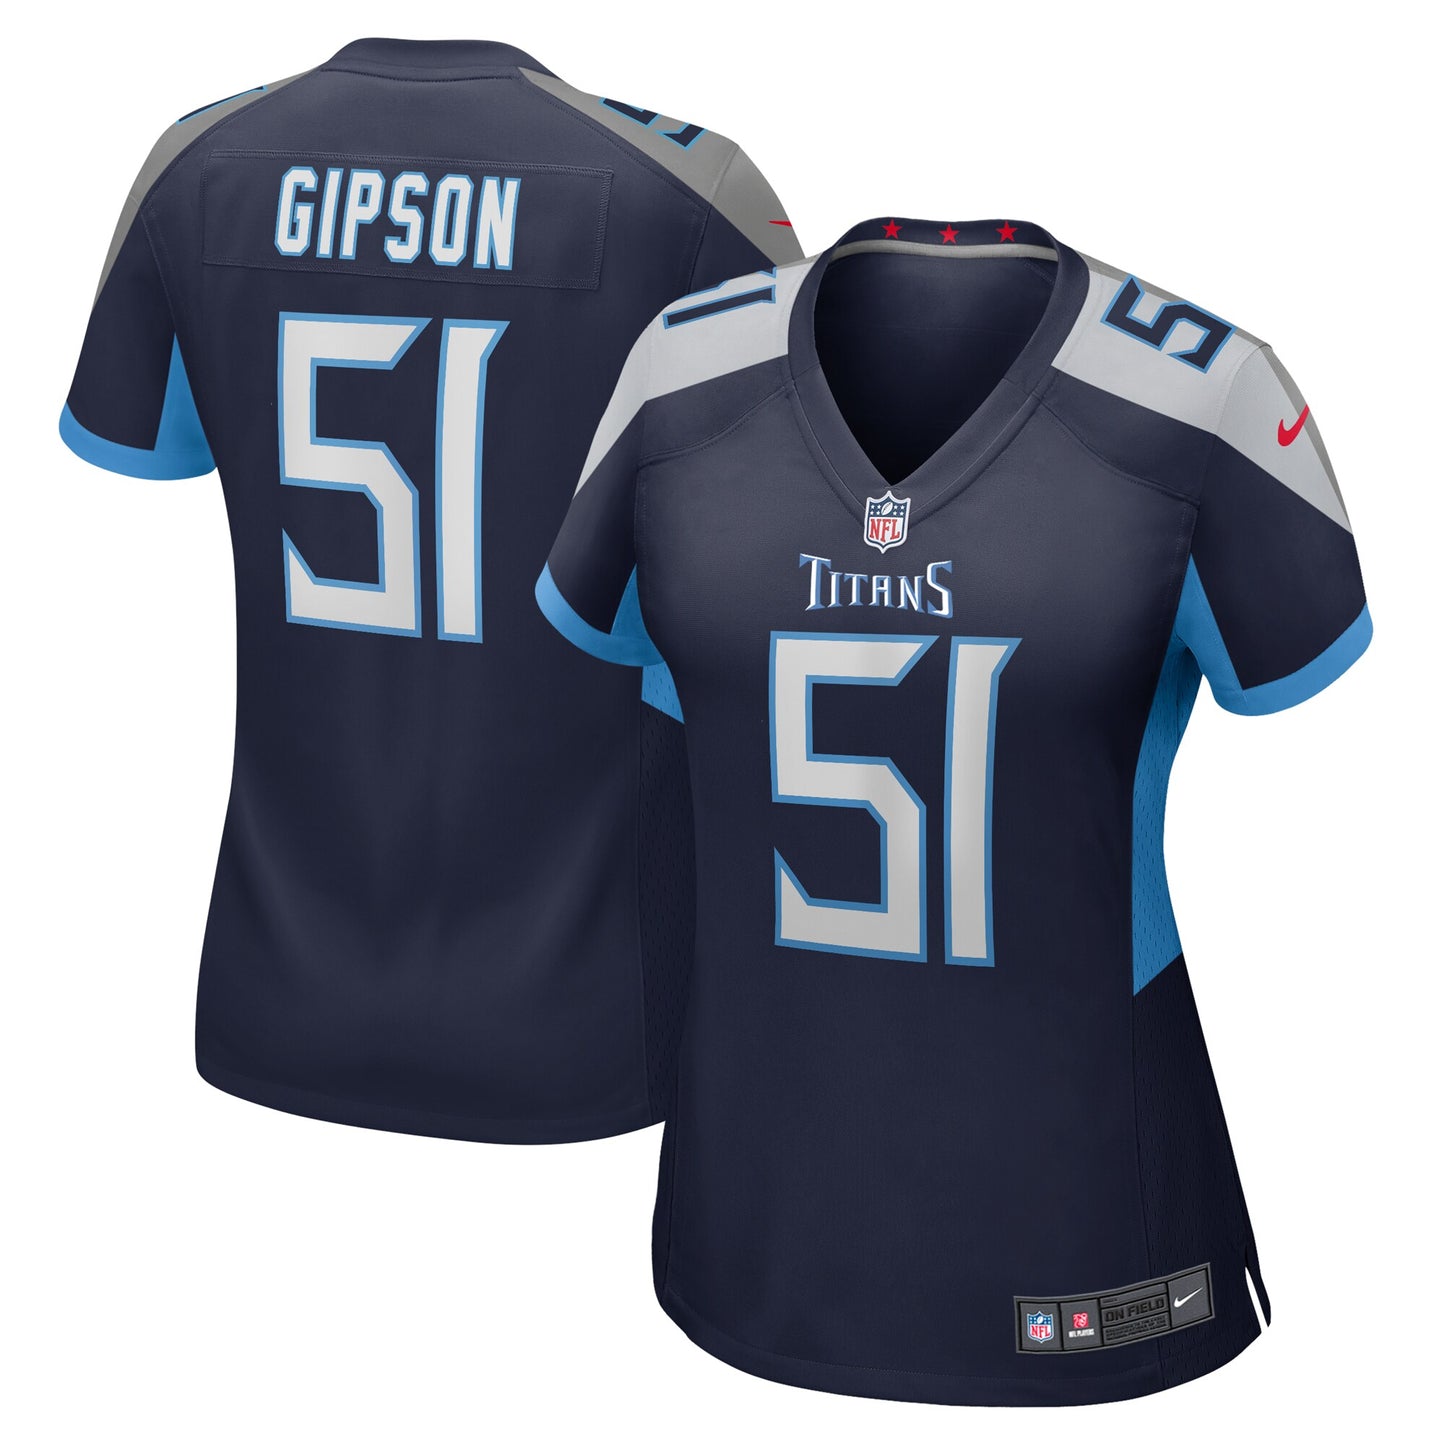 Trevis Gipson Tennessee Titans Nike Women's Team Game Jersey - Navy